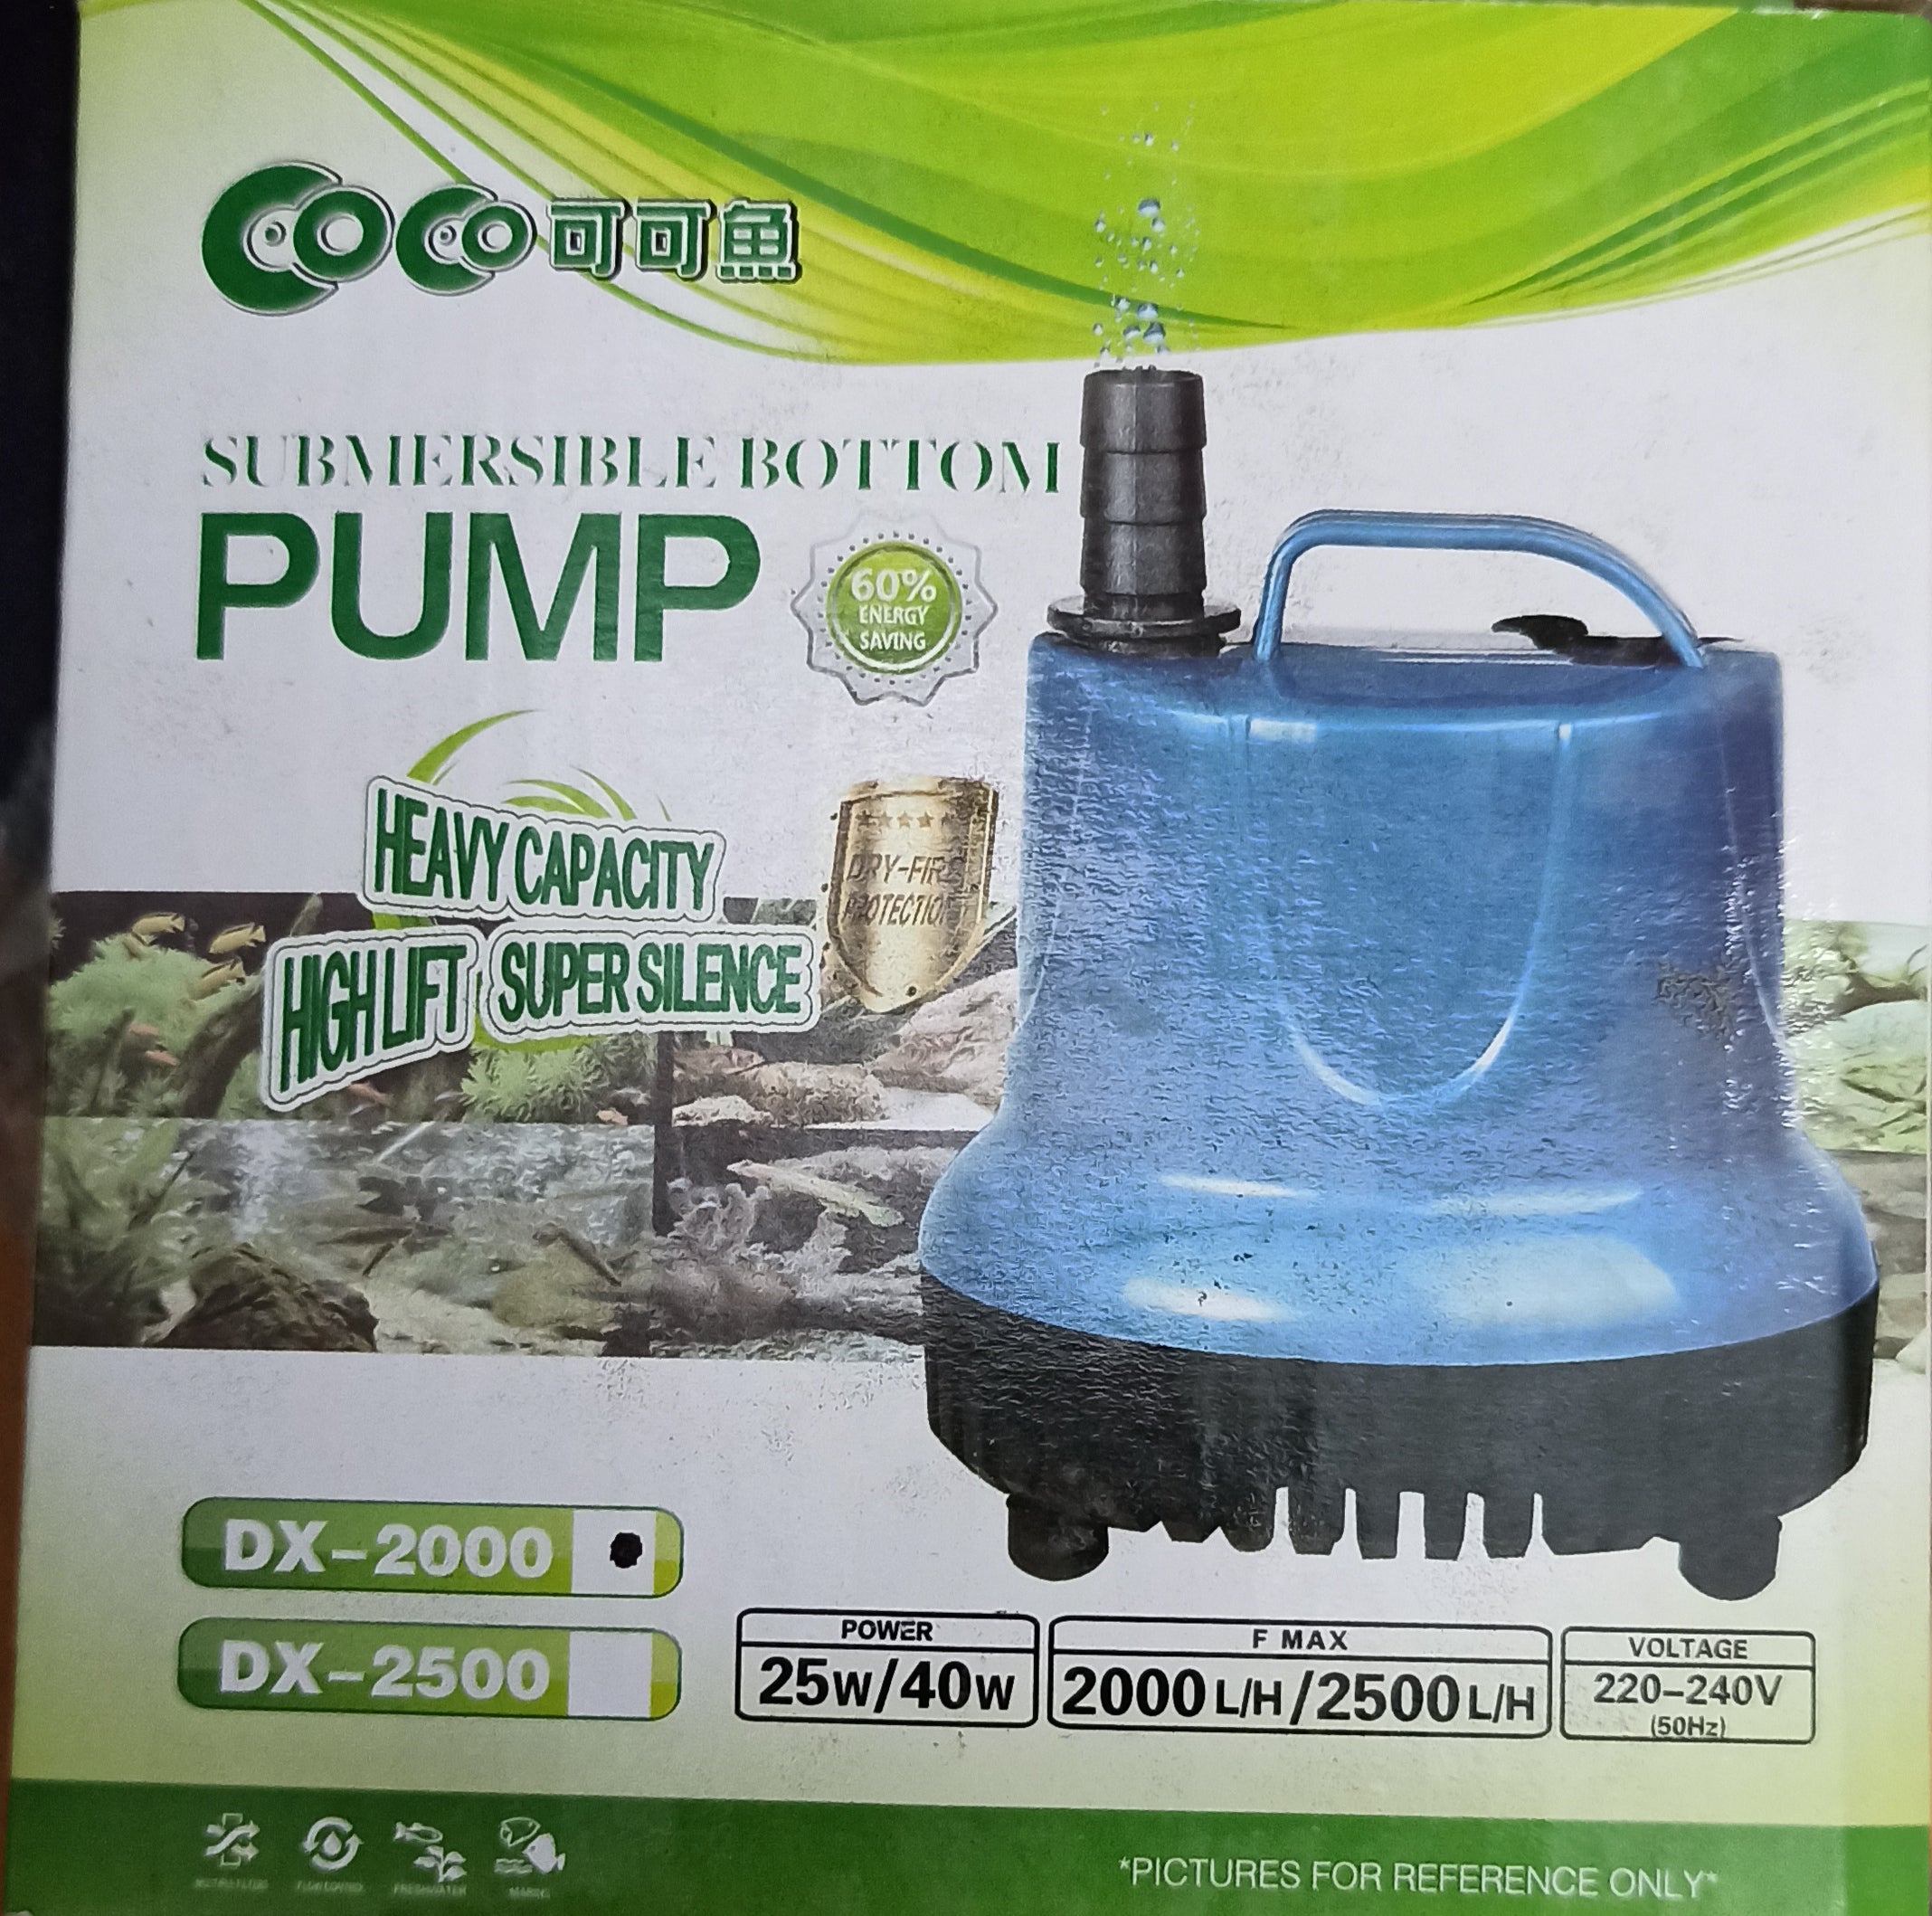 CoCo DX-2000 Submersible Pump